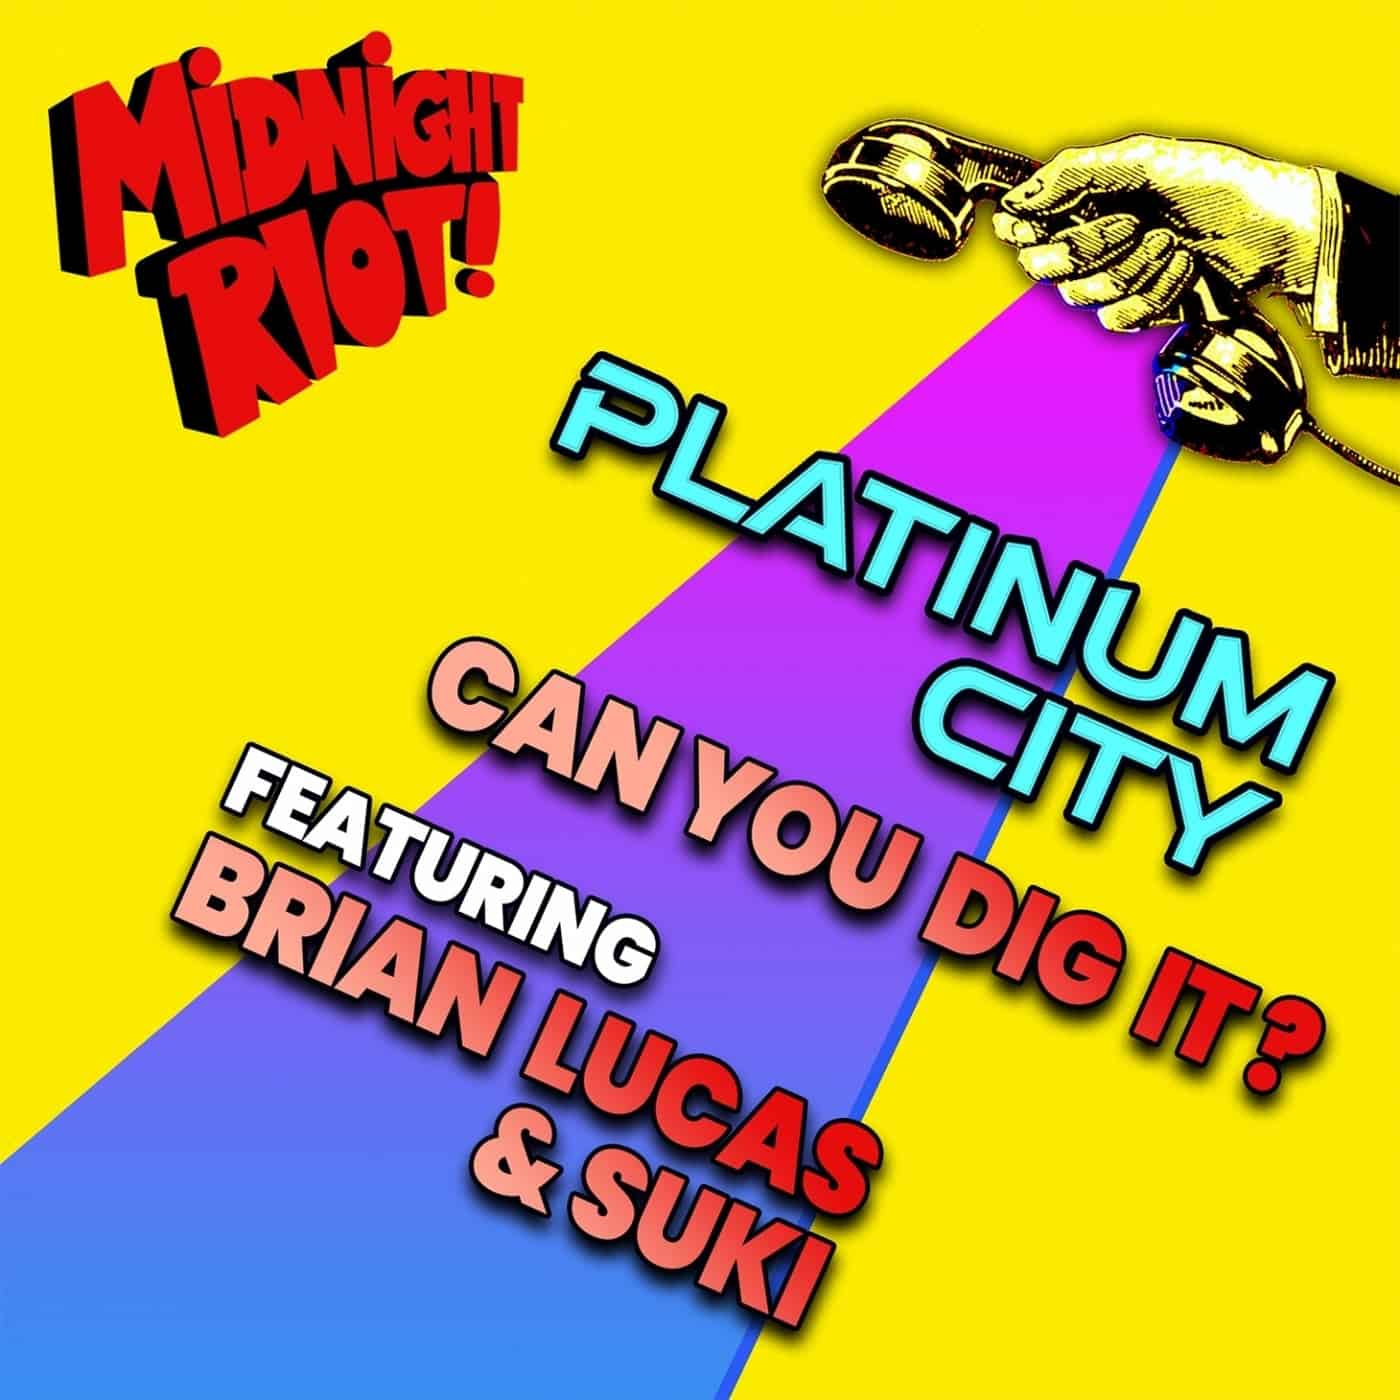 Download Brian Lucas, Platinum City, Suki Soul - Can You Dig It? (Extended Mix) on Electrobuzz